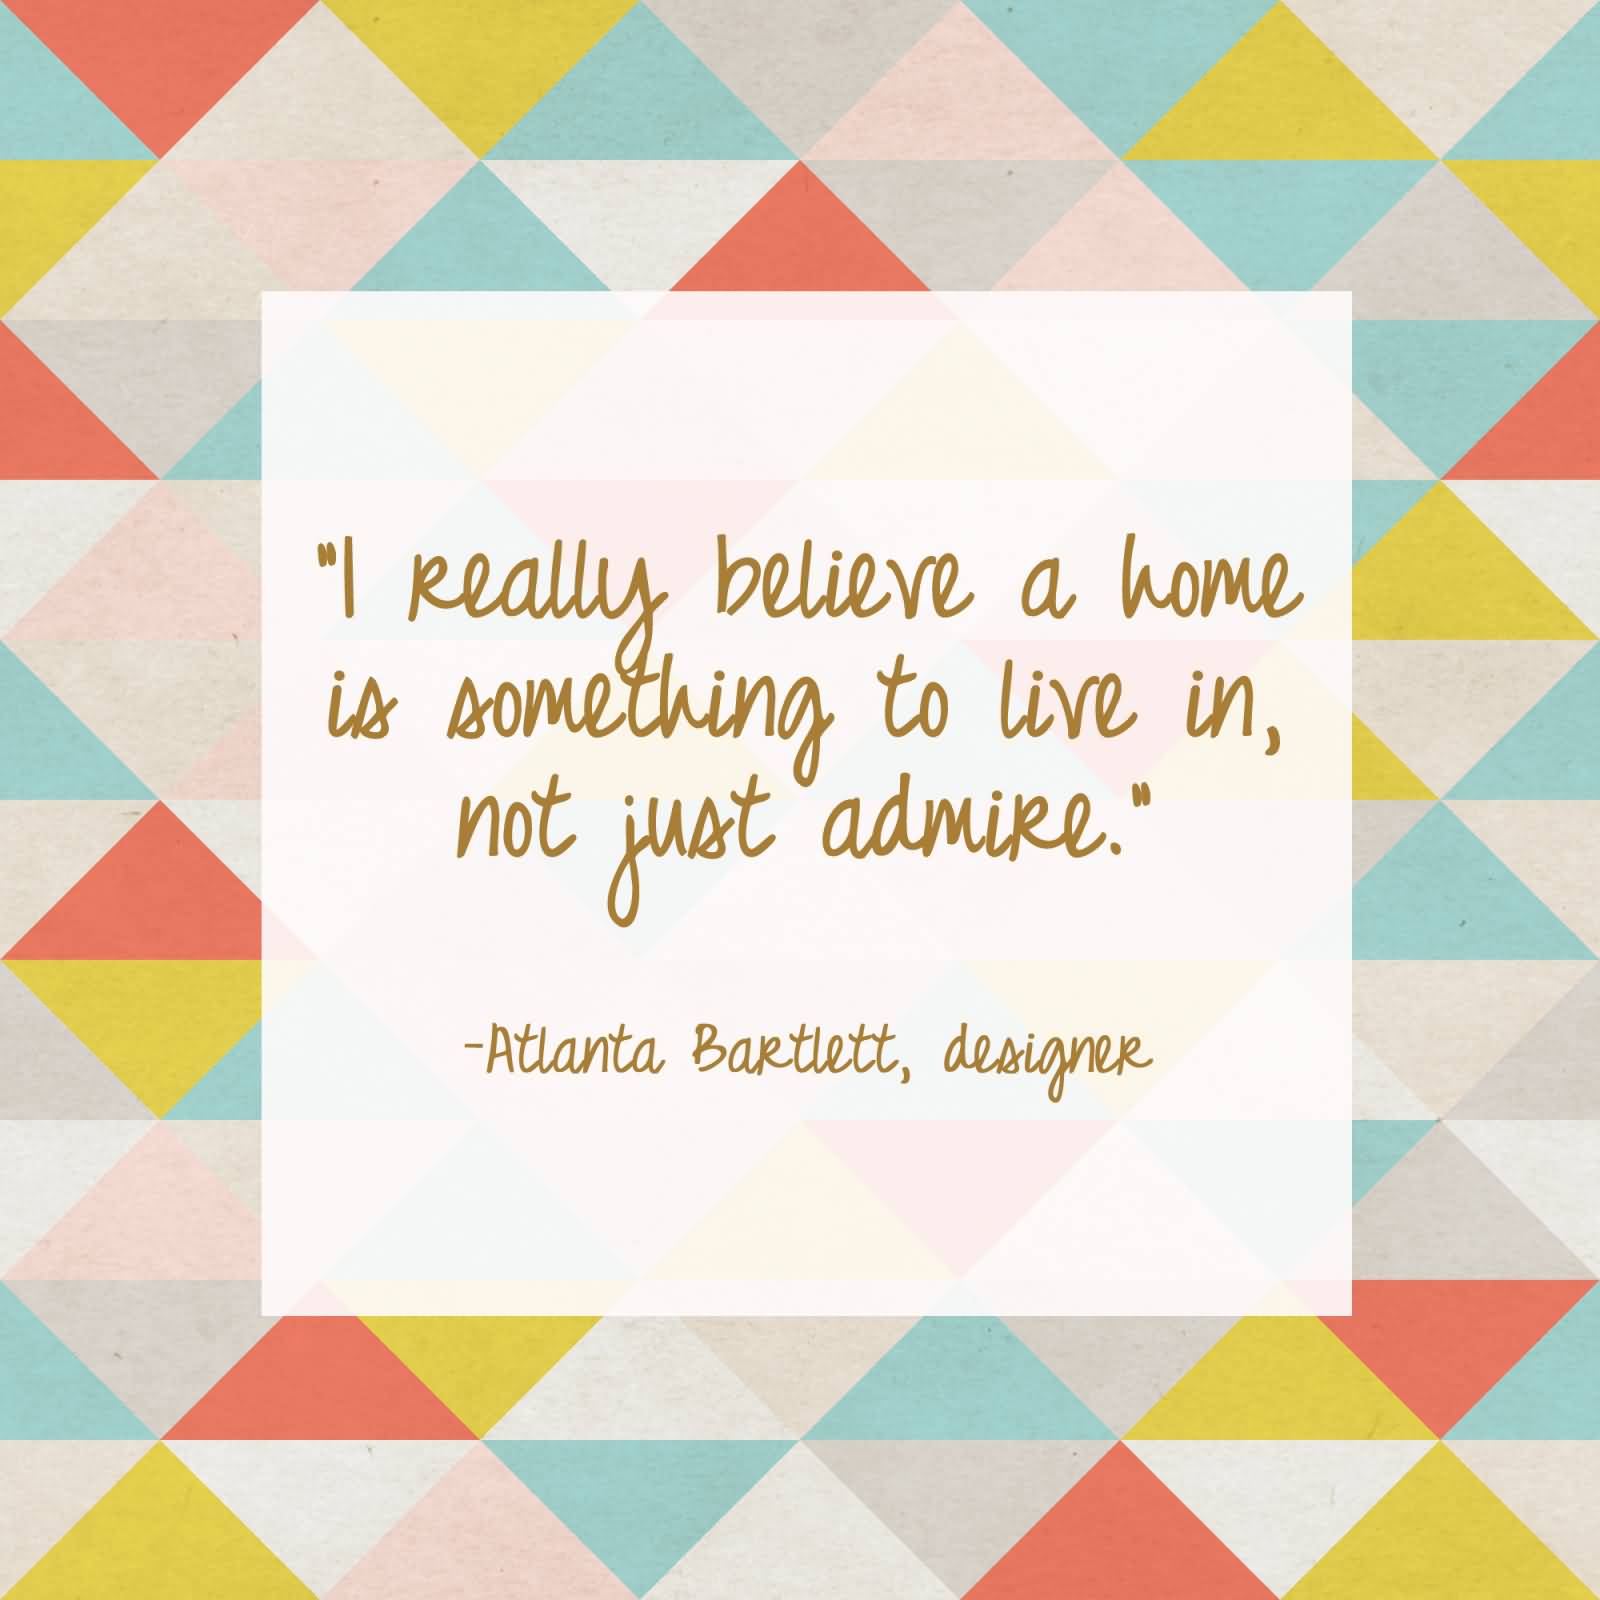 I really believe a home is something to live in, not just admire - Atlanta Bartlett